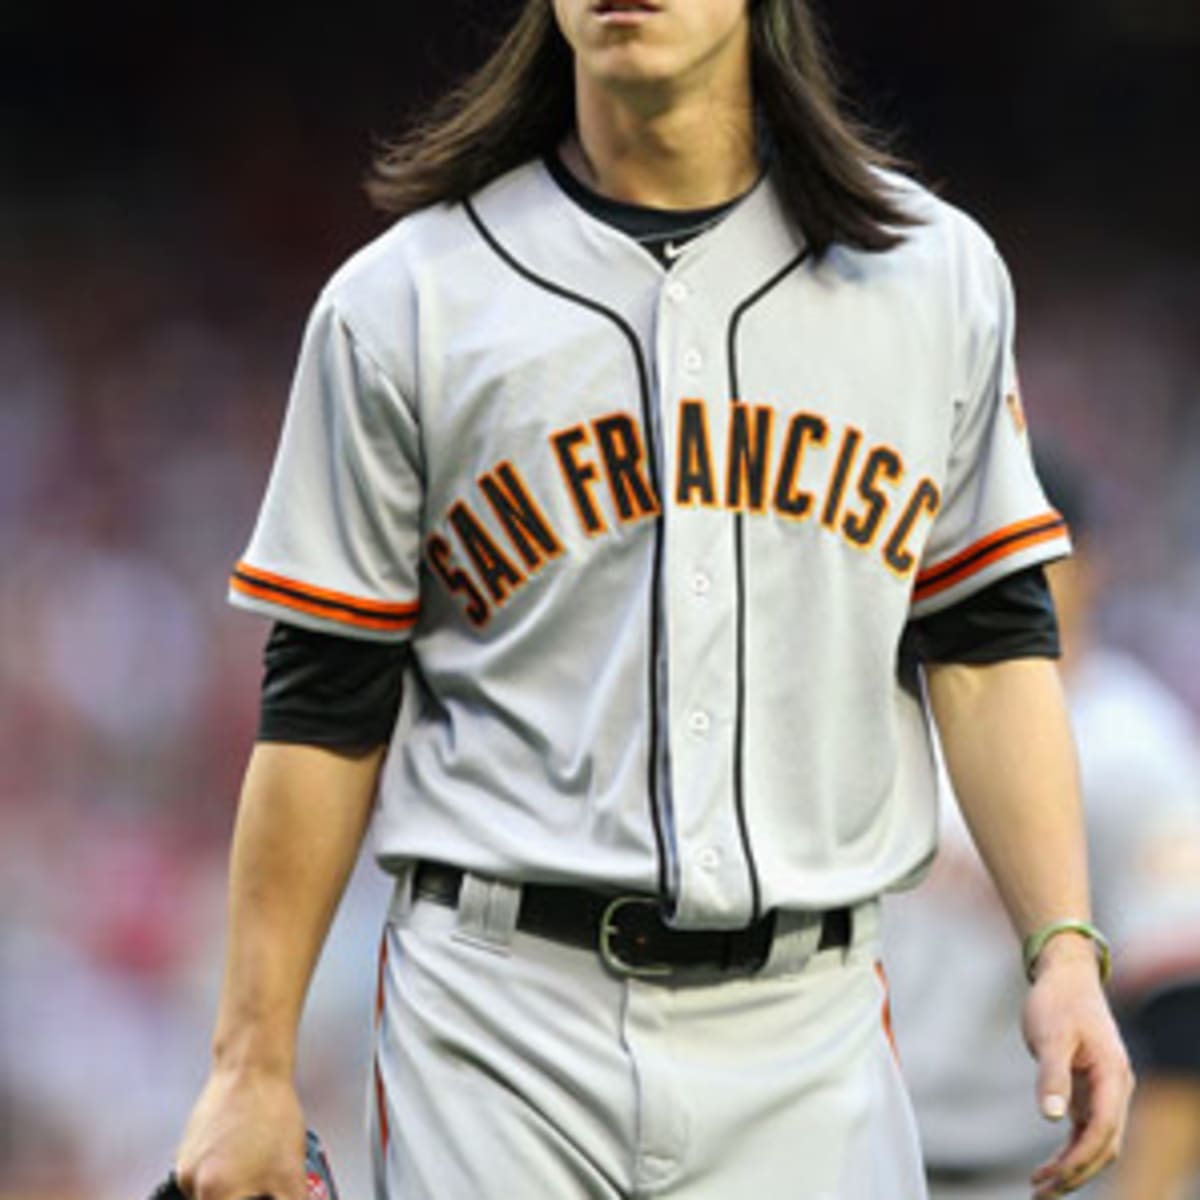 San Francisco Giants Tim Lincecum Sports Illustrated Cover by